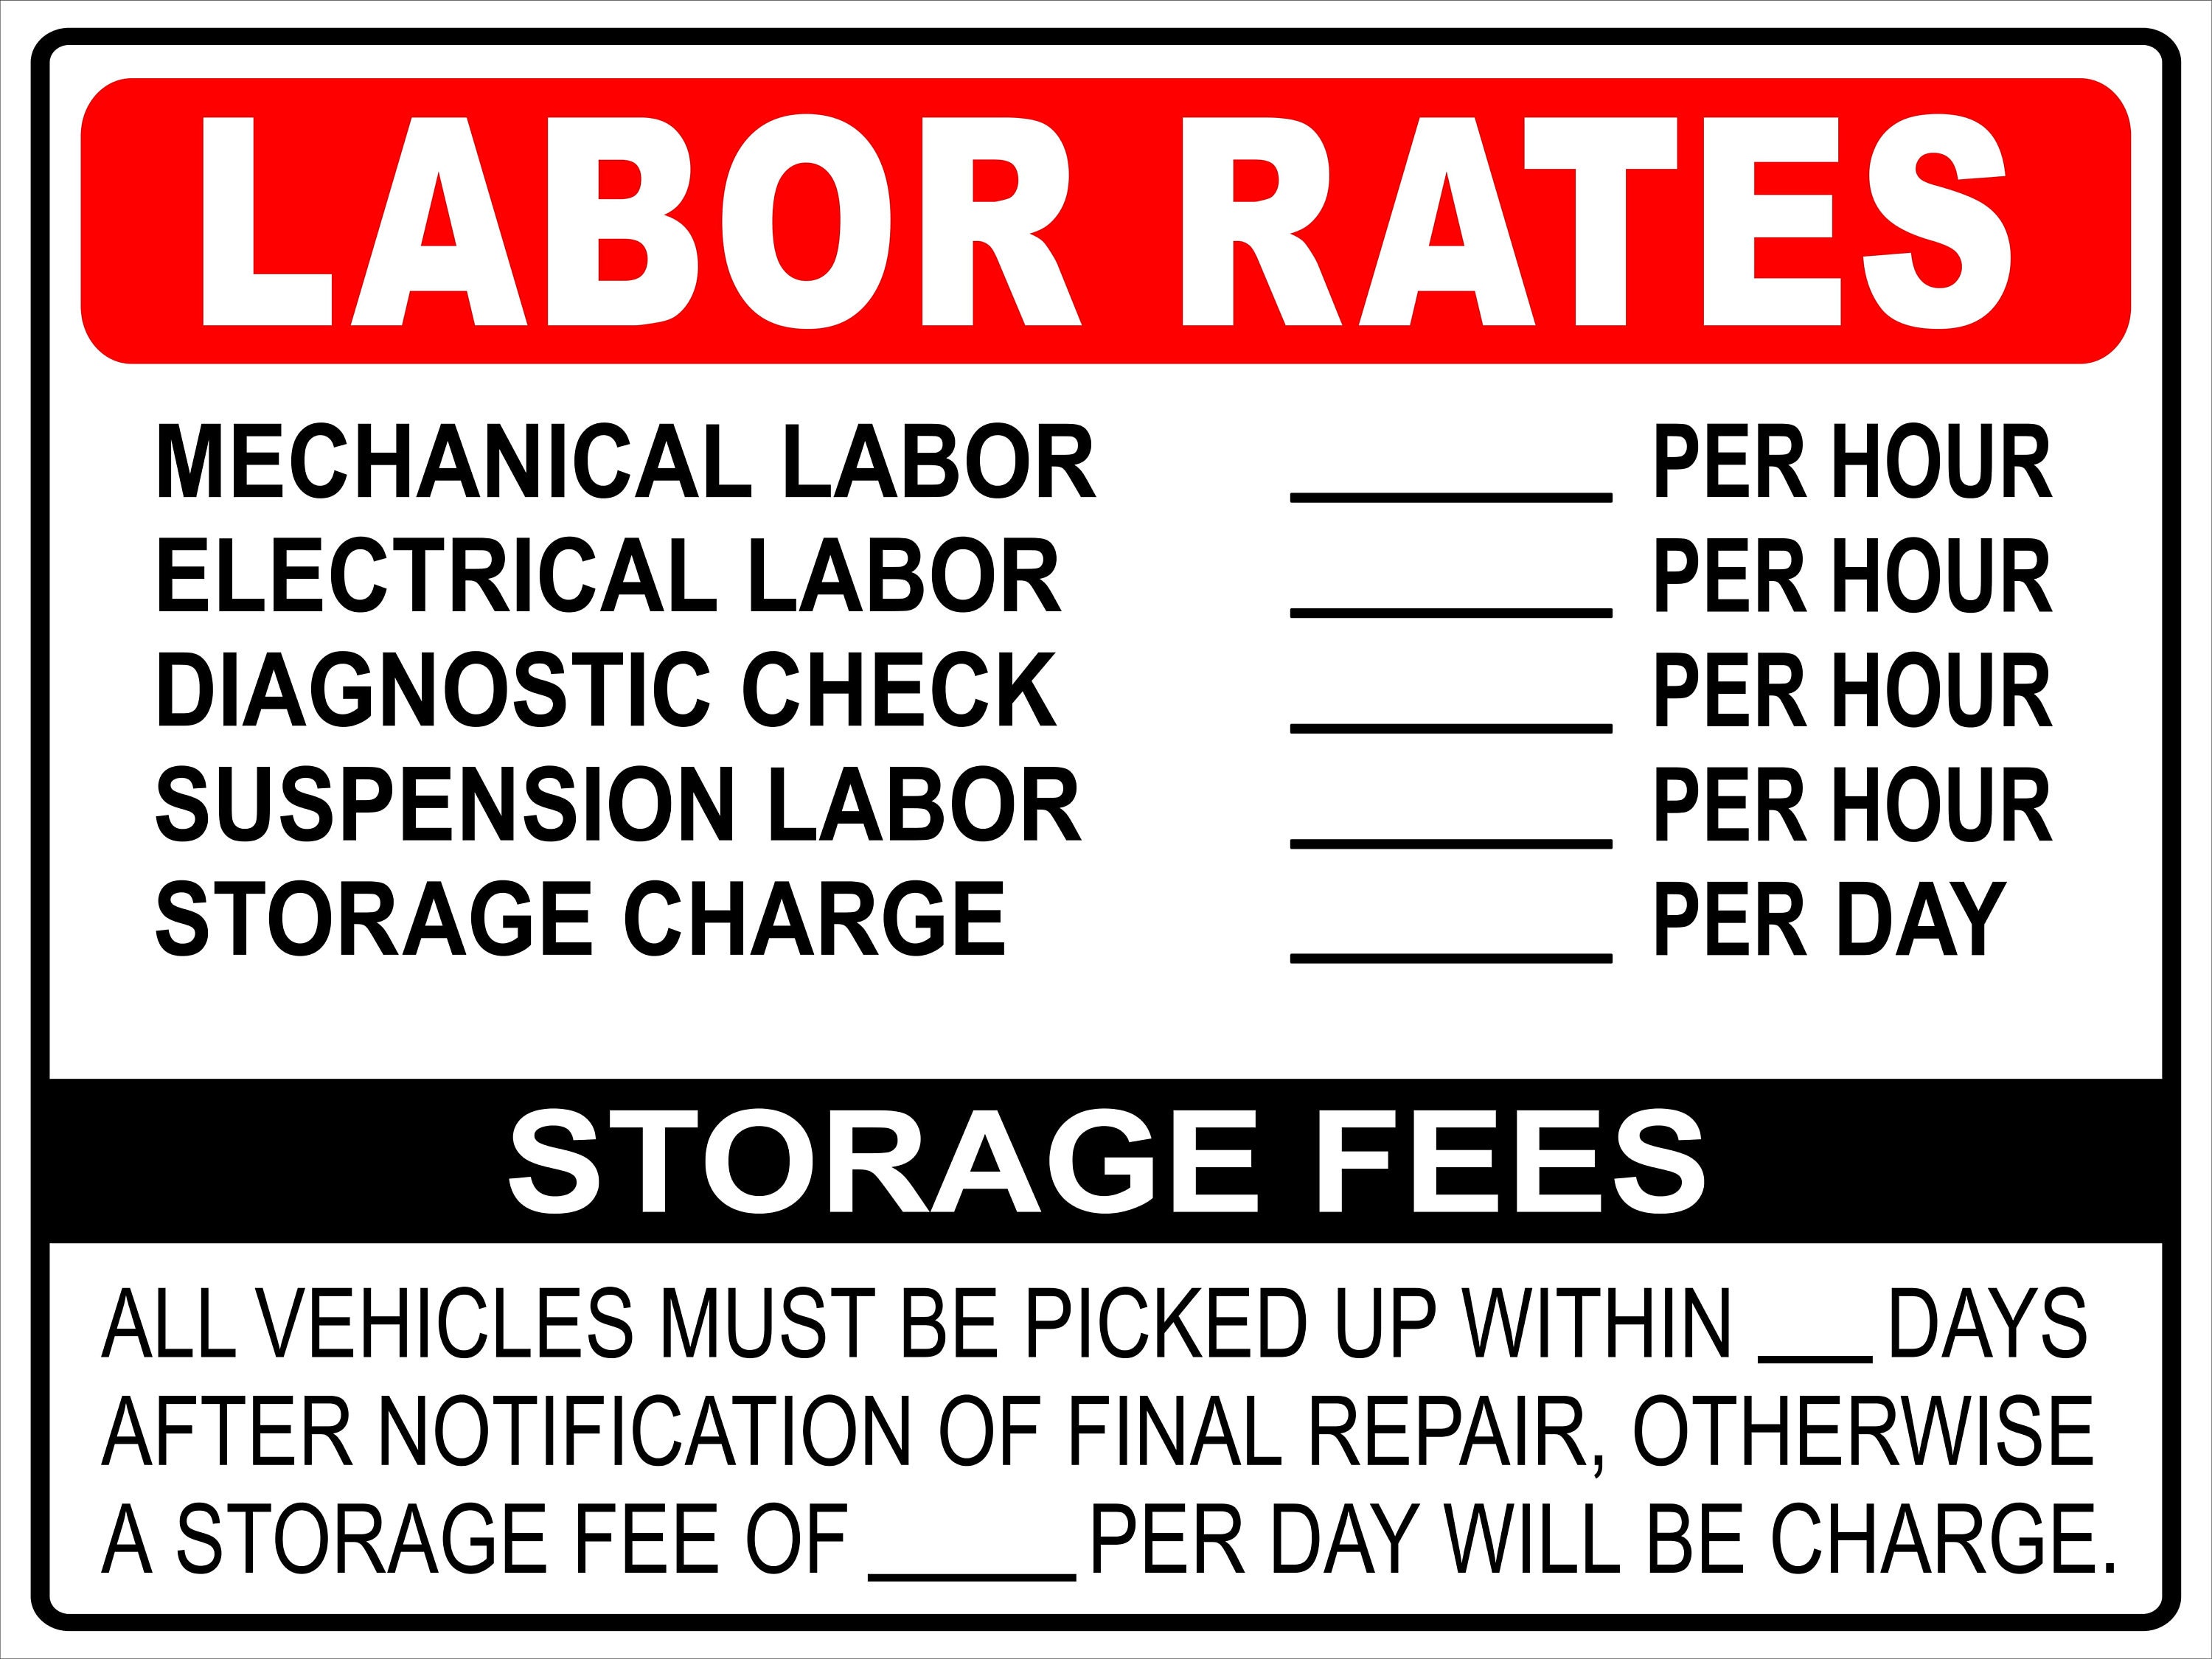 Mechanic Shop Labor Hourly Rate & Storage Fees Price Sign Template PDF